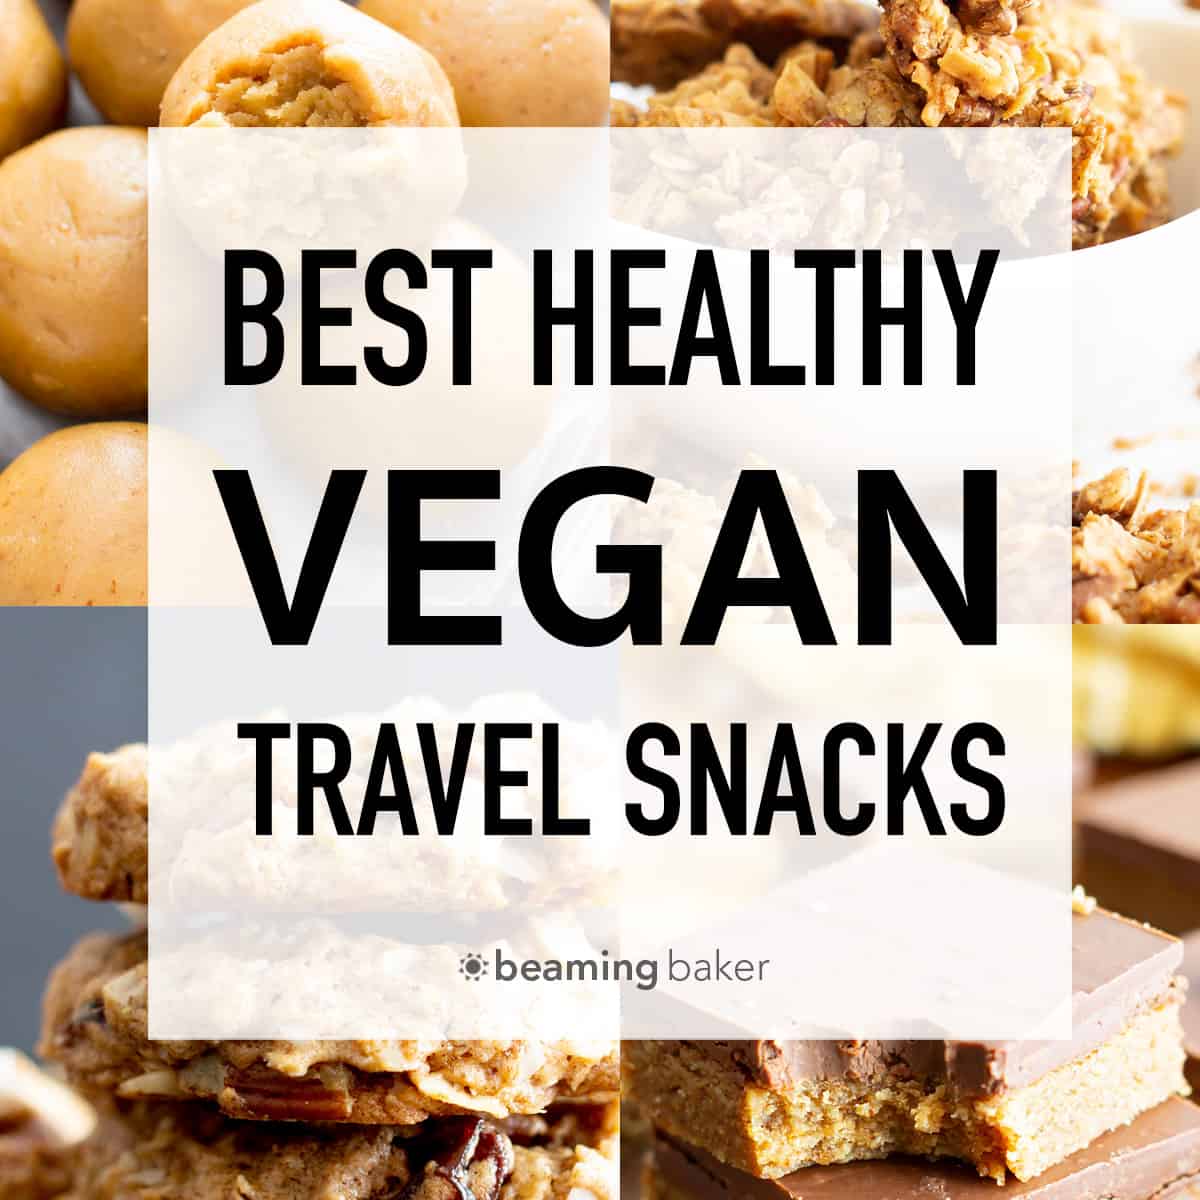 The Best Healthy Vegan Travel Snacks (Recipes, Tips & More!)